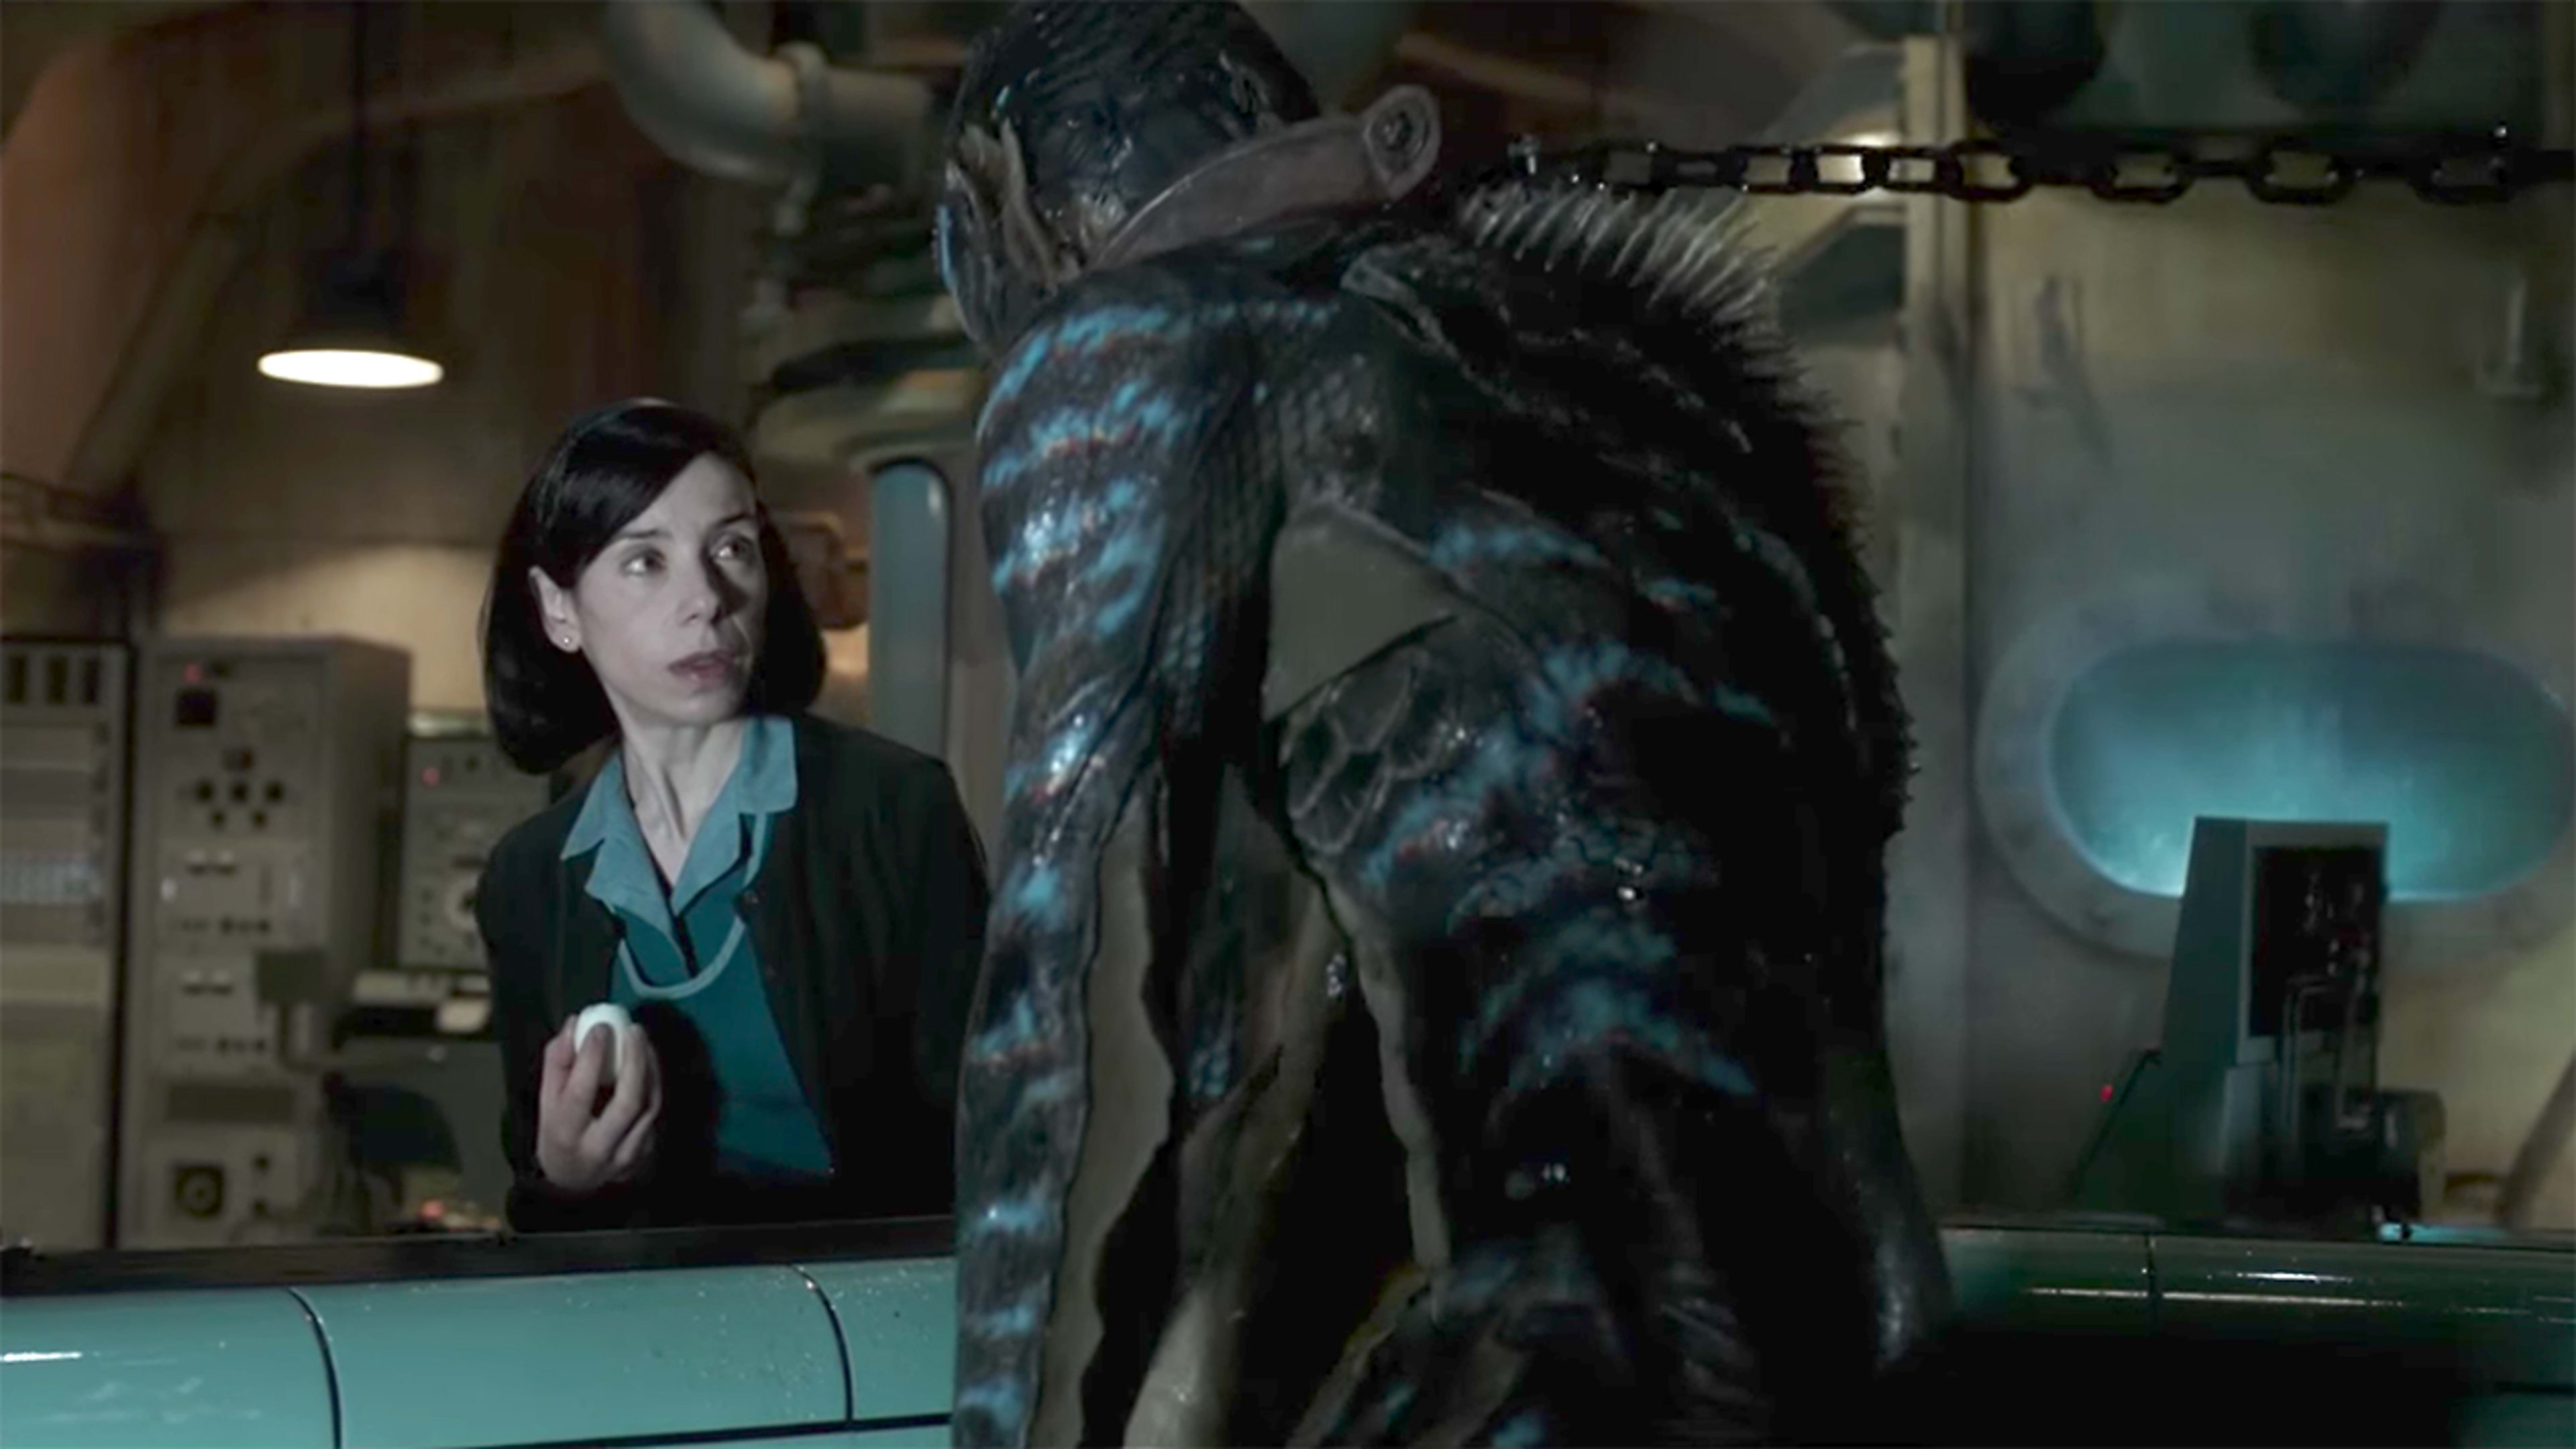 How Guillermo del Toro’s New Film Is And Isn’t Like M. Night Shyamalan’s “Lady in the Water”